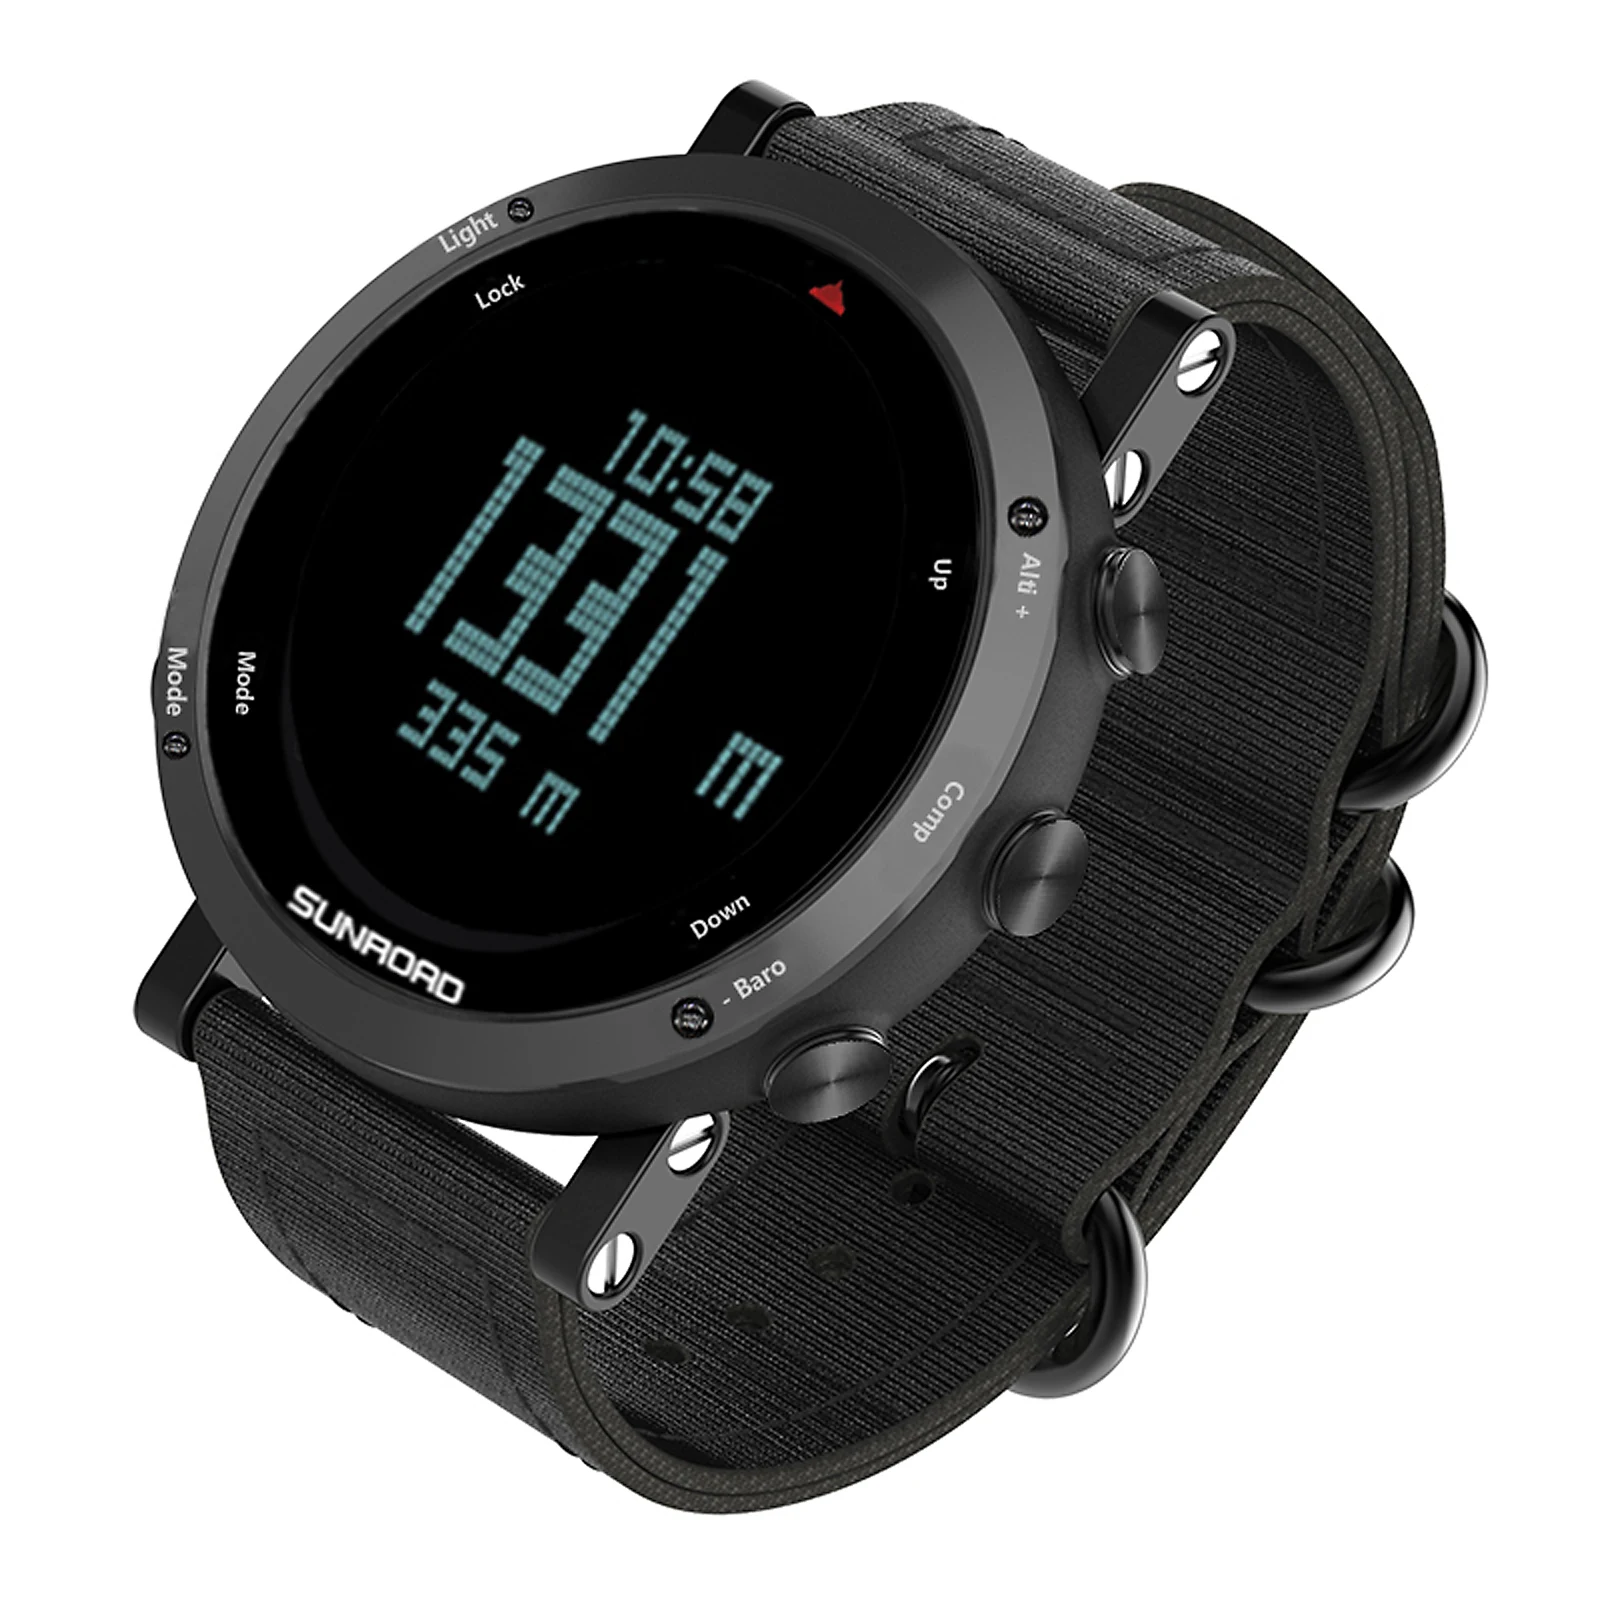 

SUNROAD FR851B Multifunctional Outdoor Sports Watch Altimeter Compass Thermometer for Mountaineering Running Trekking Camping